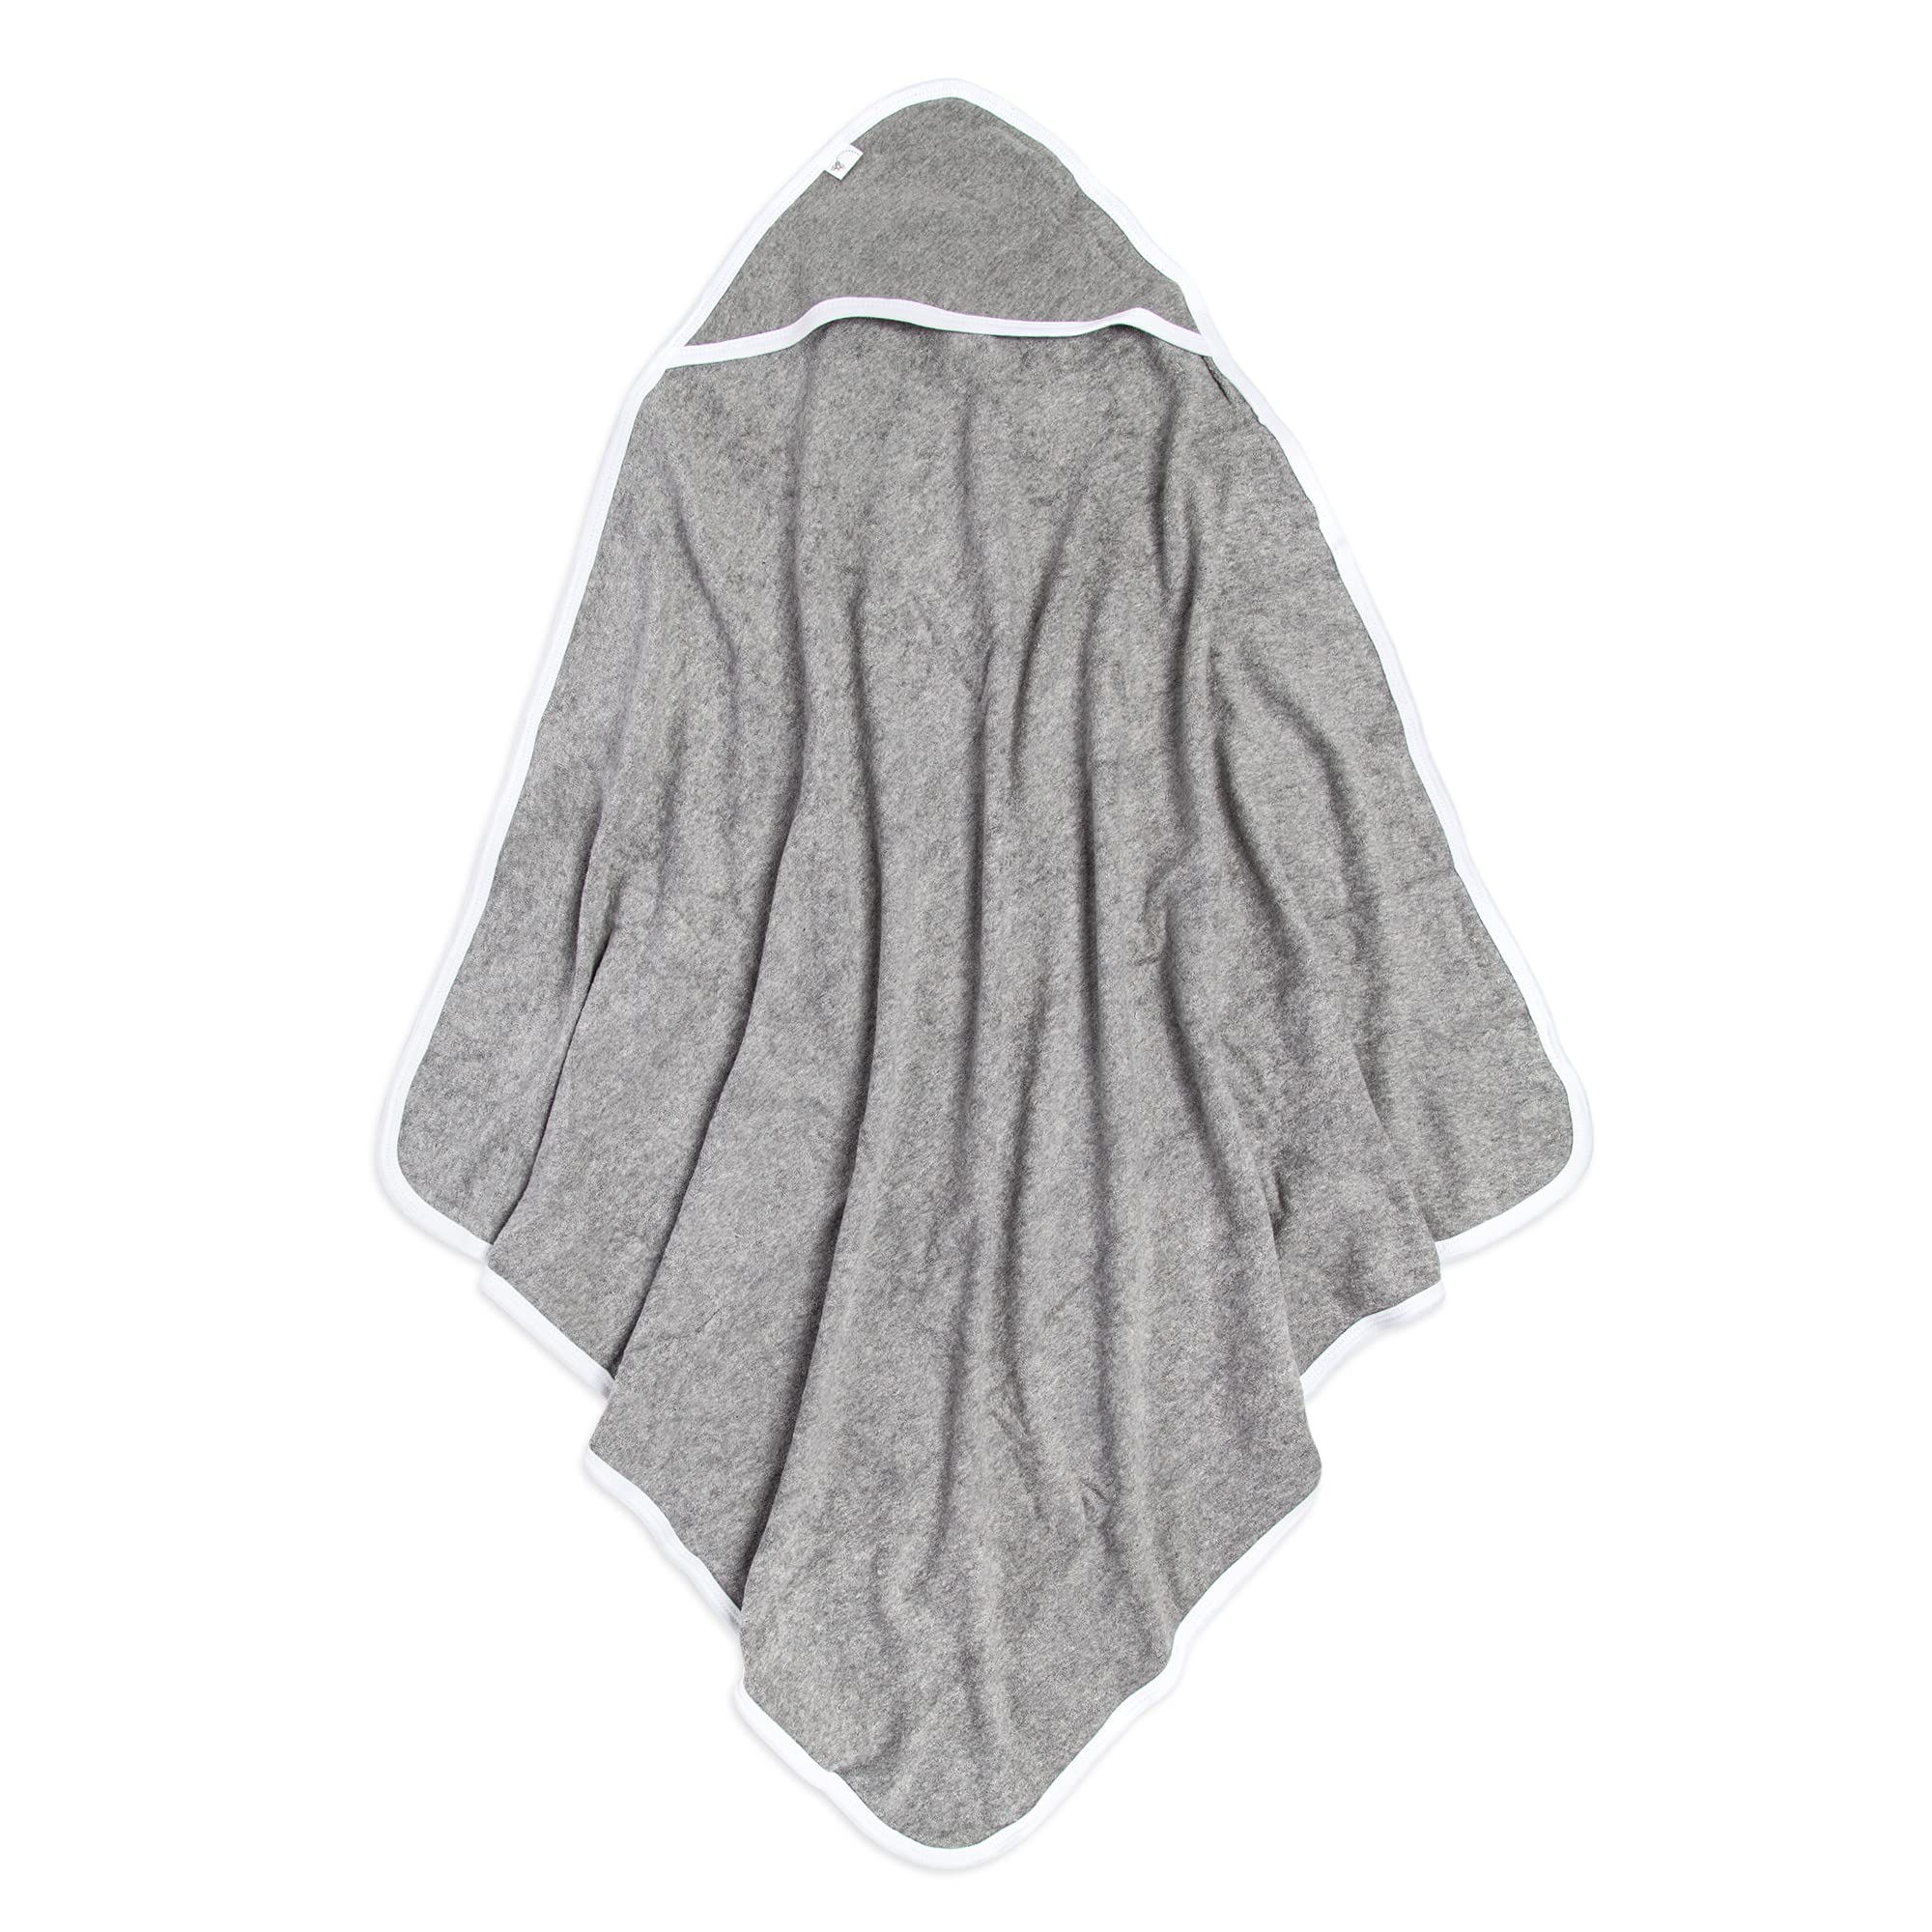 Burt's Bees Baby - Hooded Towels, Absorbent Knit Terry, Super Soft Single Ply, 100% Organic Cotton